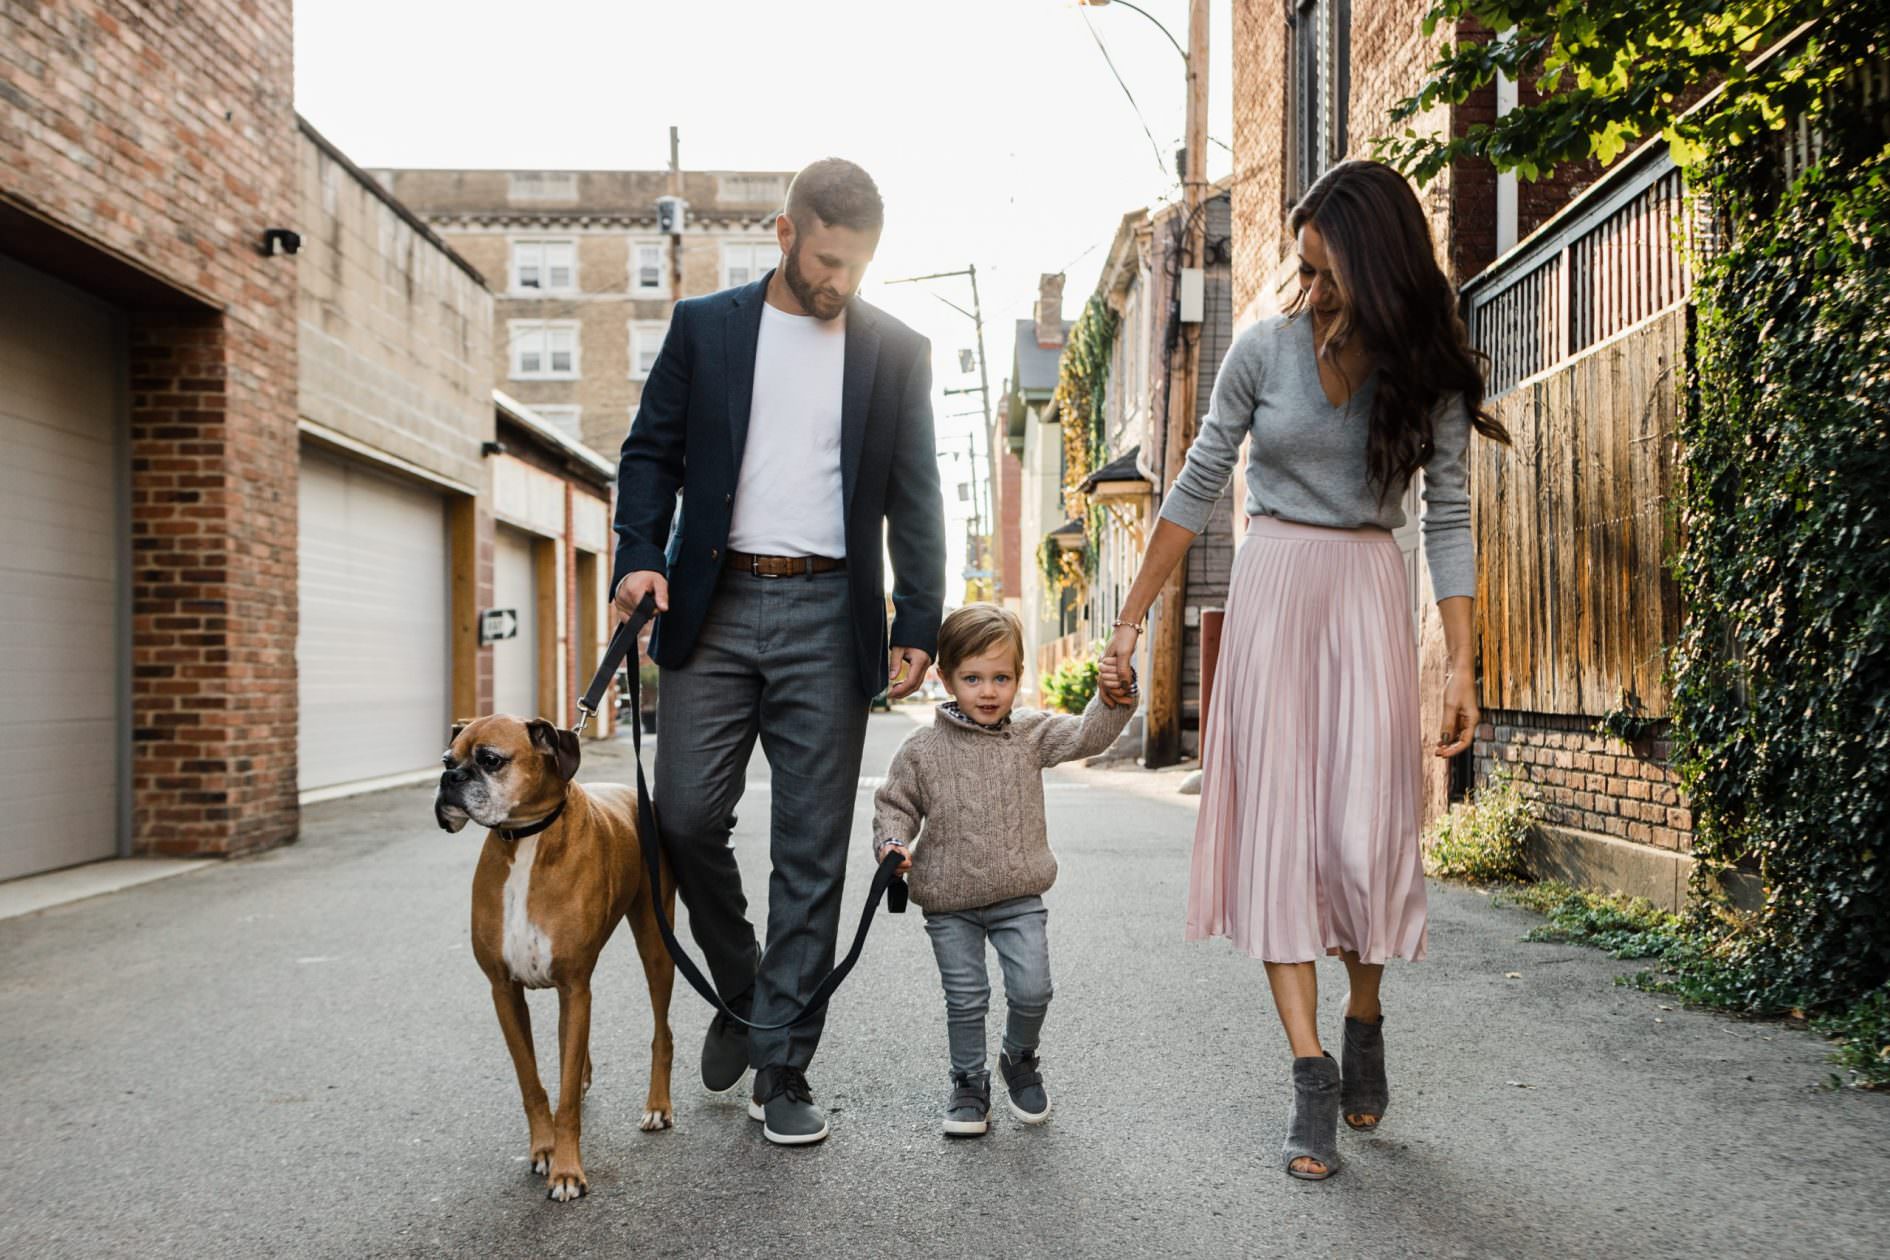 natural family photo in city neighborhood with family dog